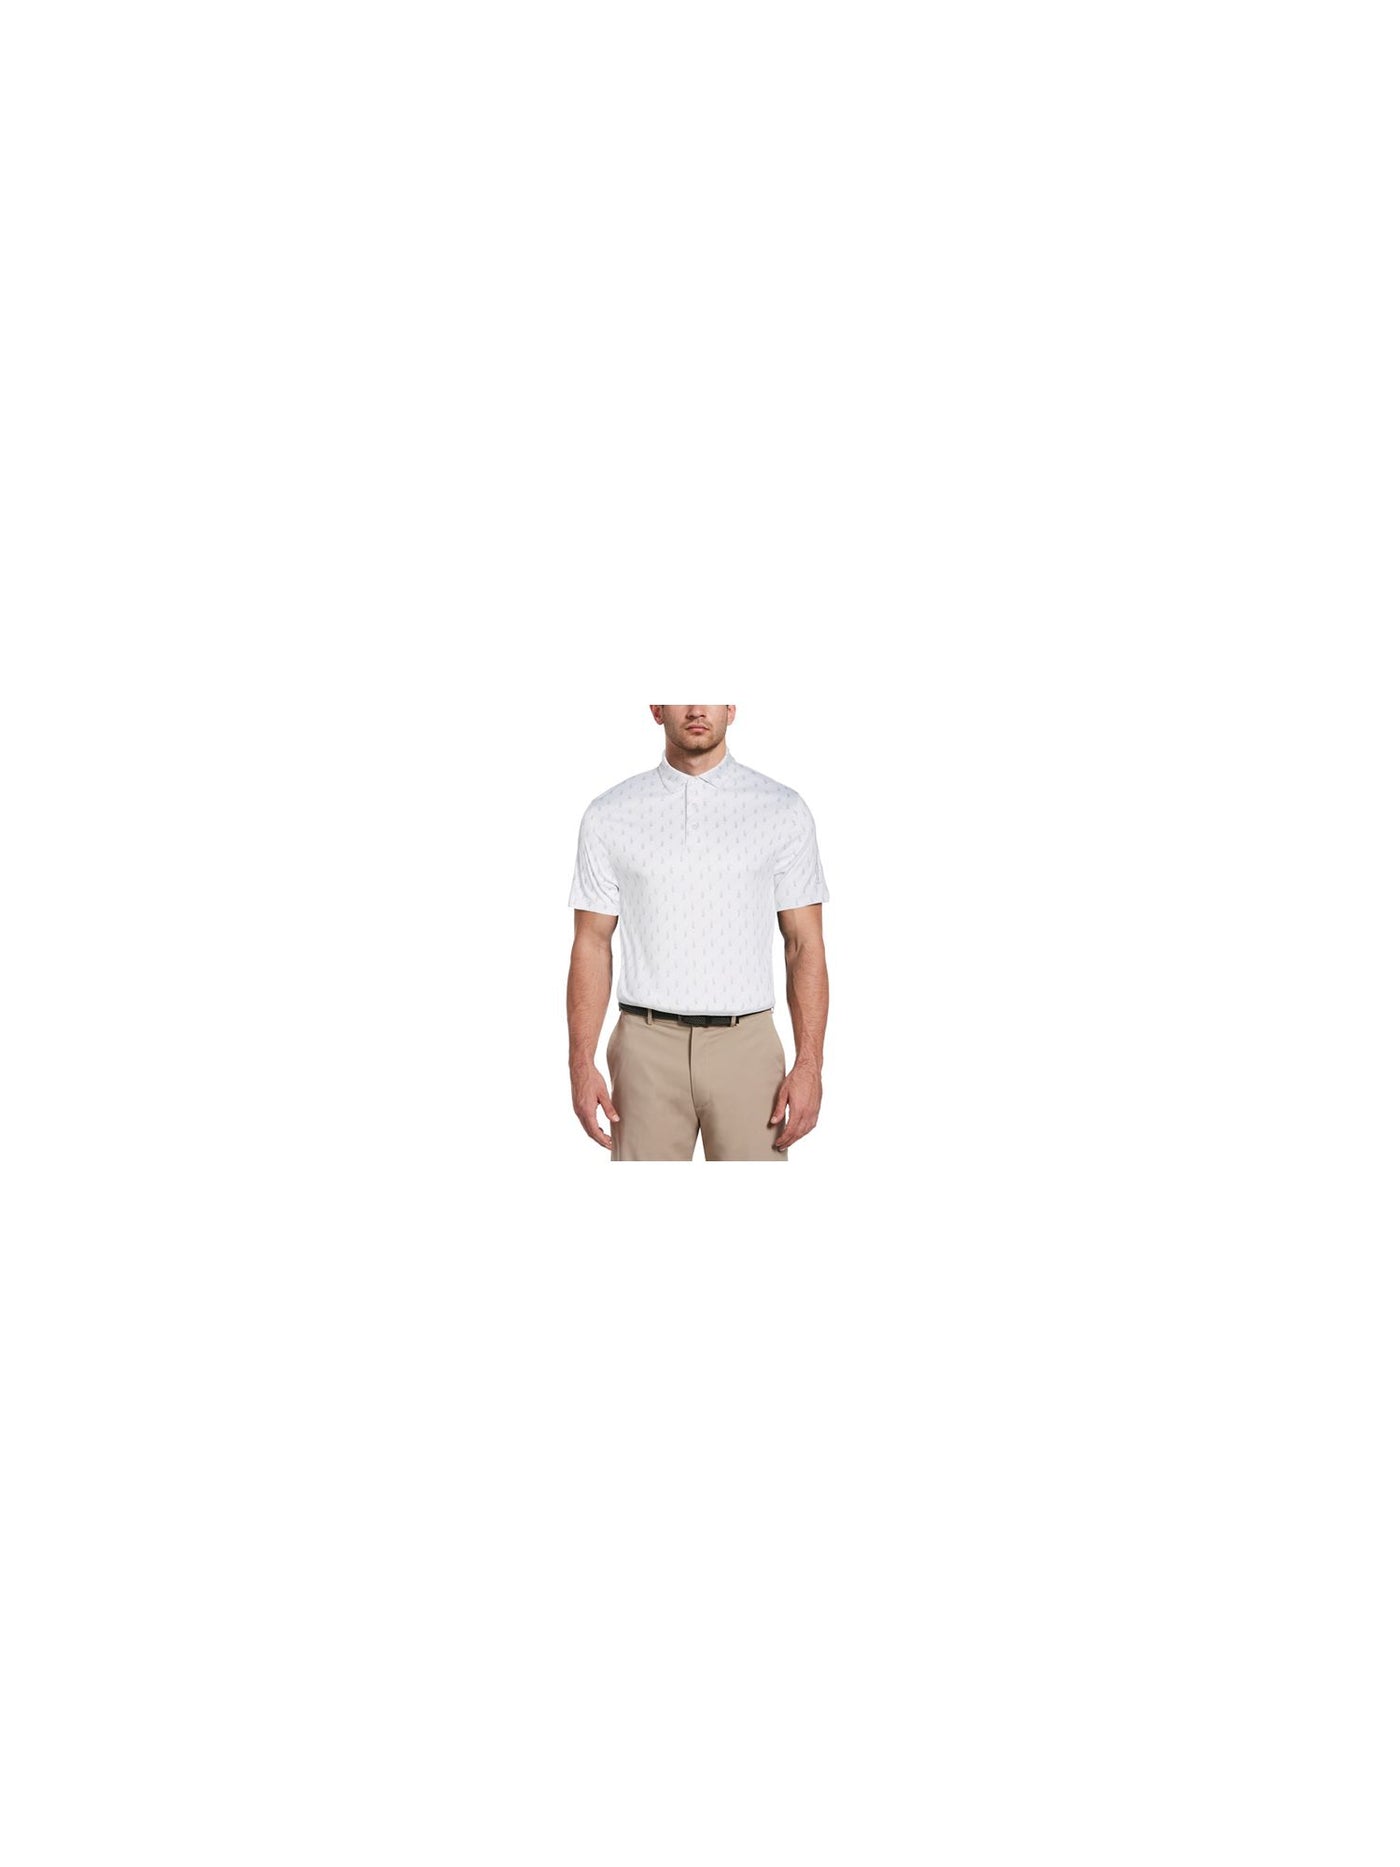 HYBRID APPAREL Mens White Short Sleeve Classic Fit Performance Stretch Polo S